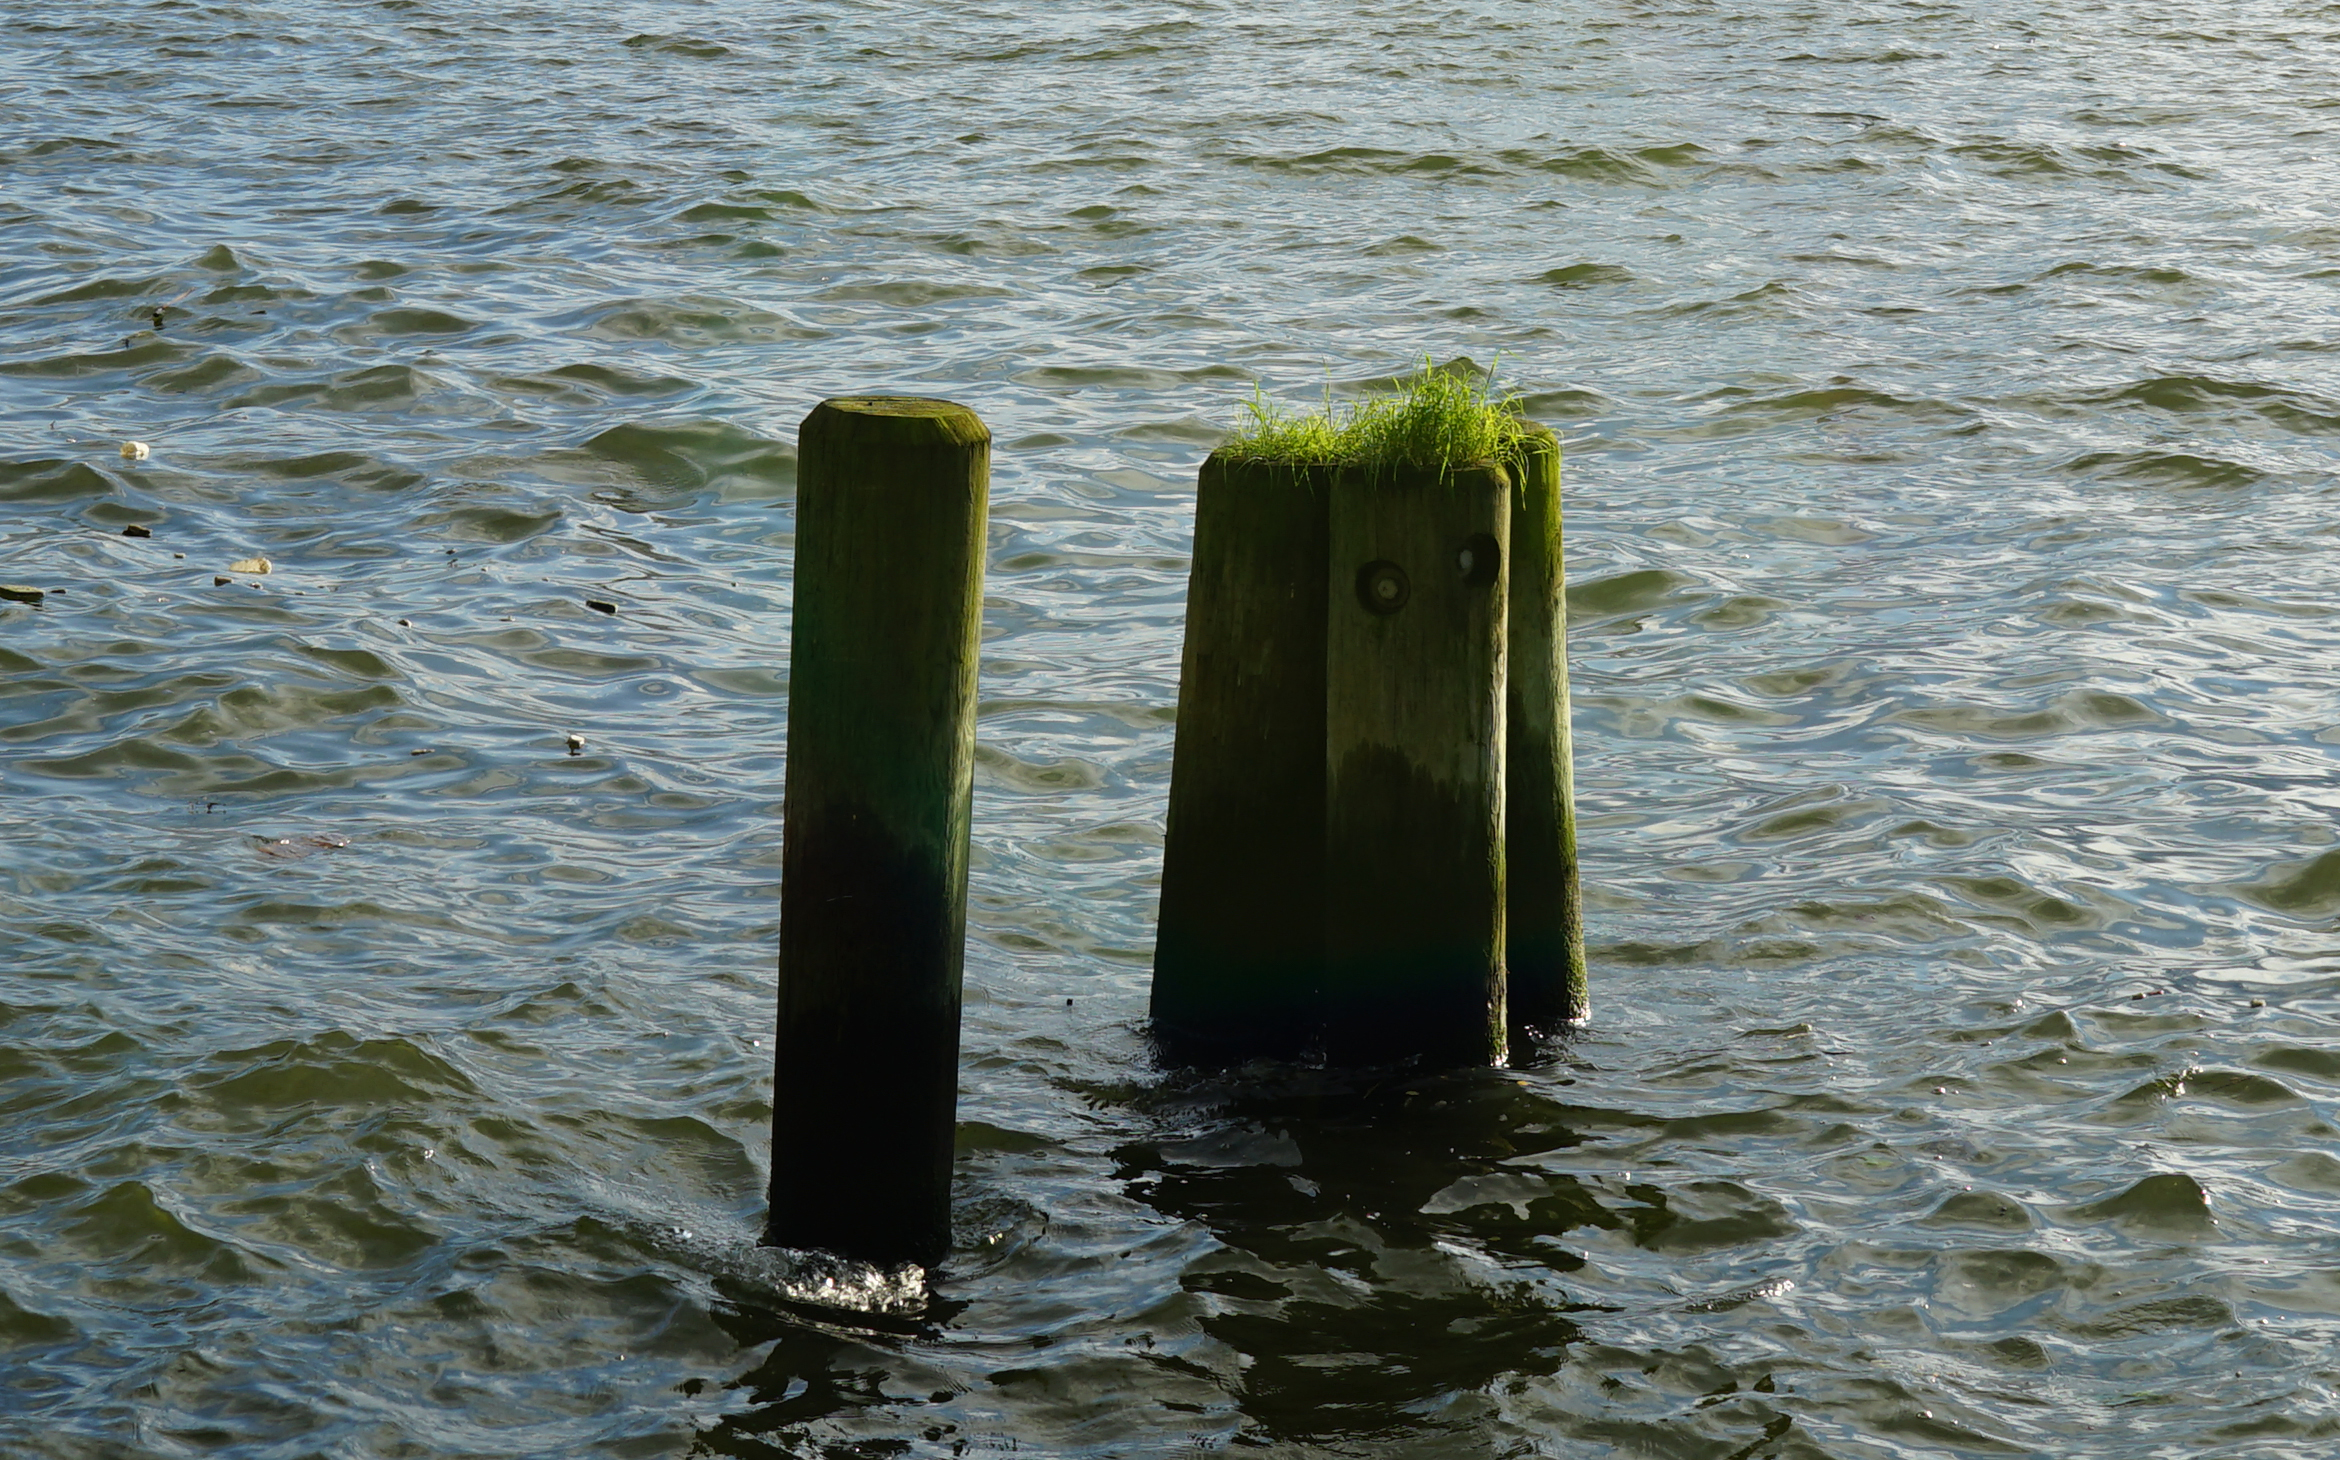 South Cove piles with grass zoom